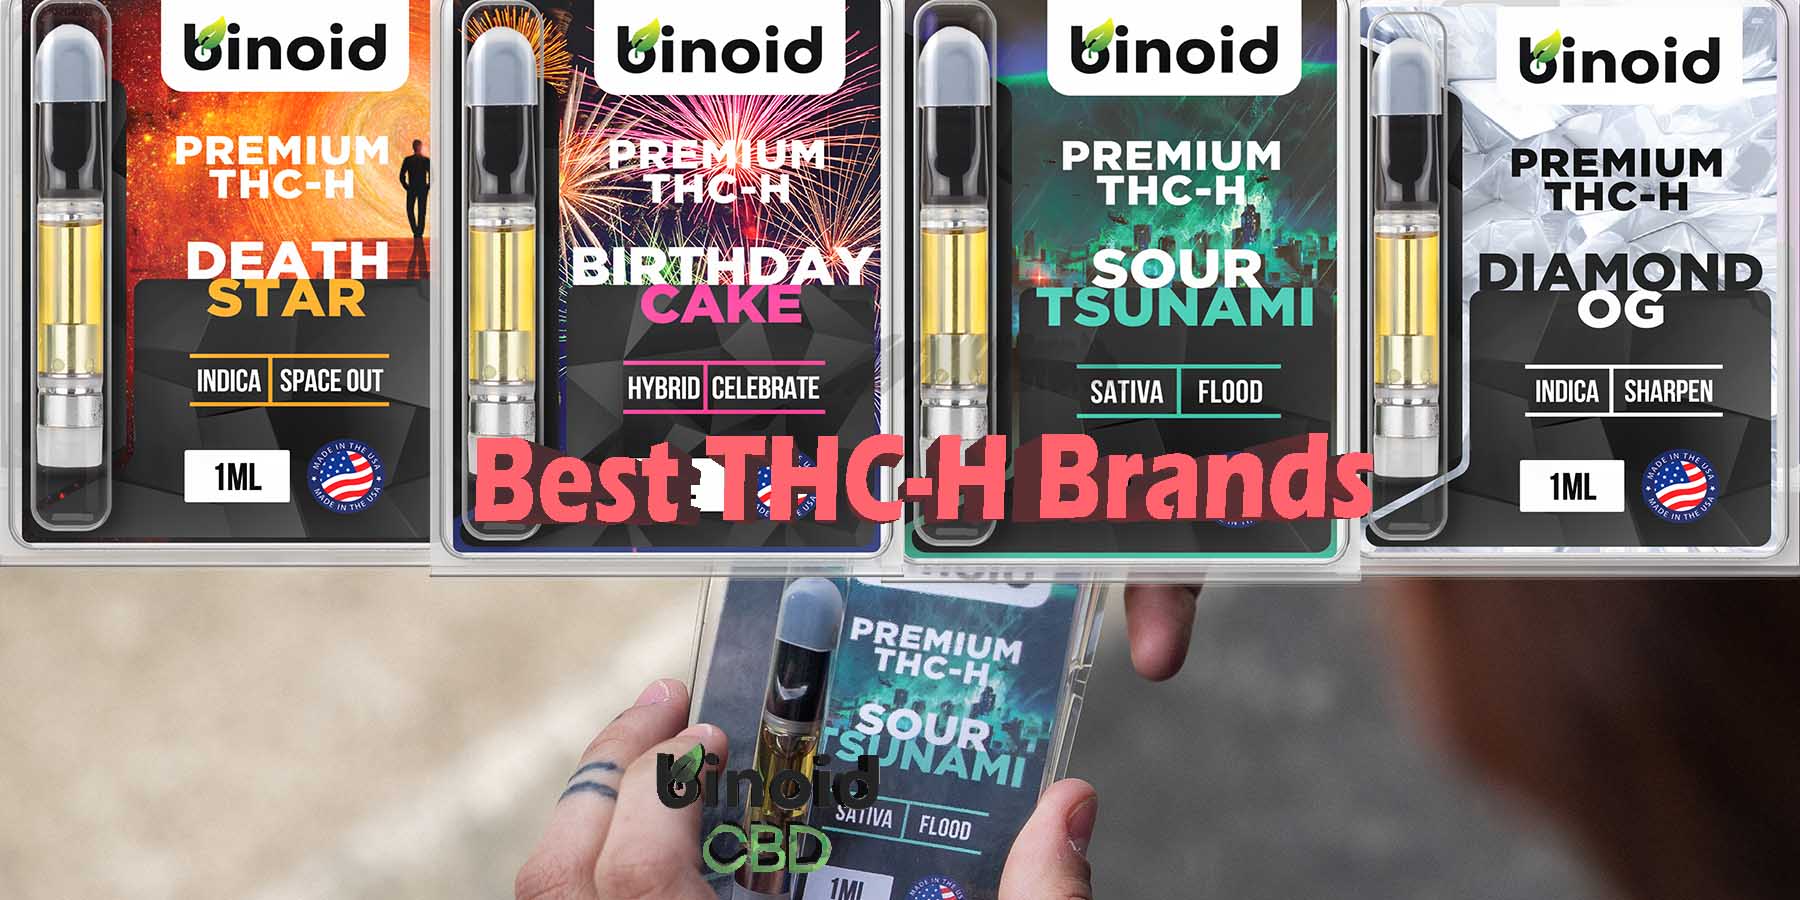 Best THC-H Brands Review Take Work Online Best Brand Price Get Near Me Lowest Coupon Discount Store Shop Vapes Carts Online Binoid